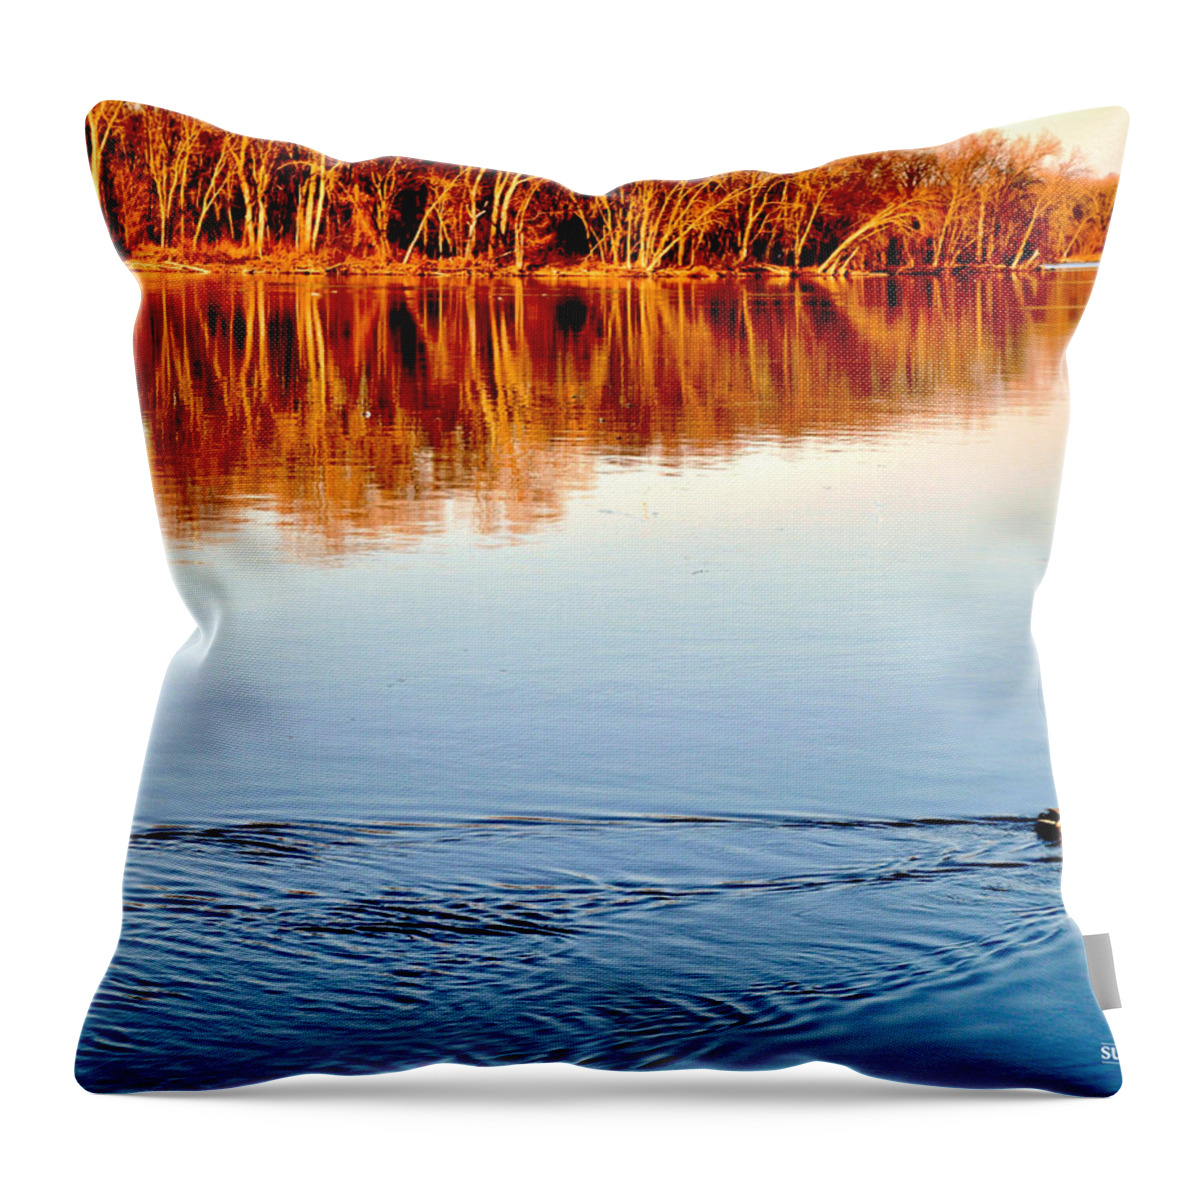 Ducks Throw Pillow featuring the photograph Heading Home by Susie Loechler